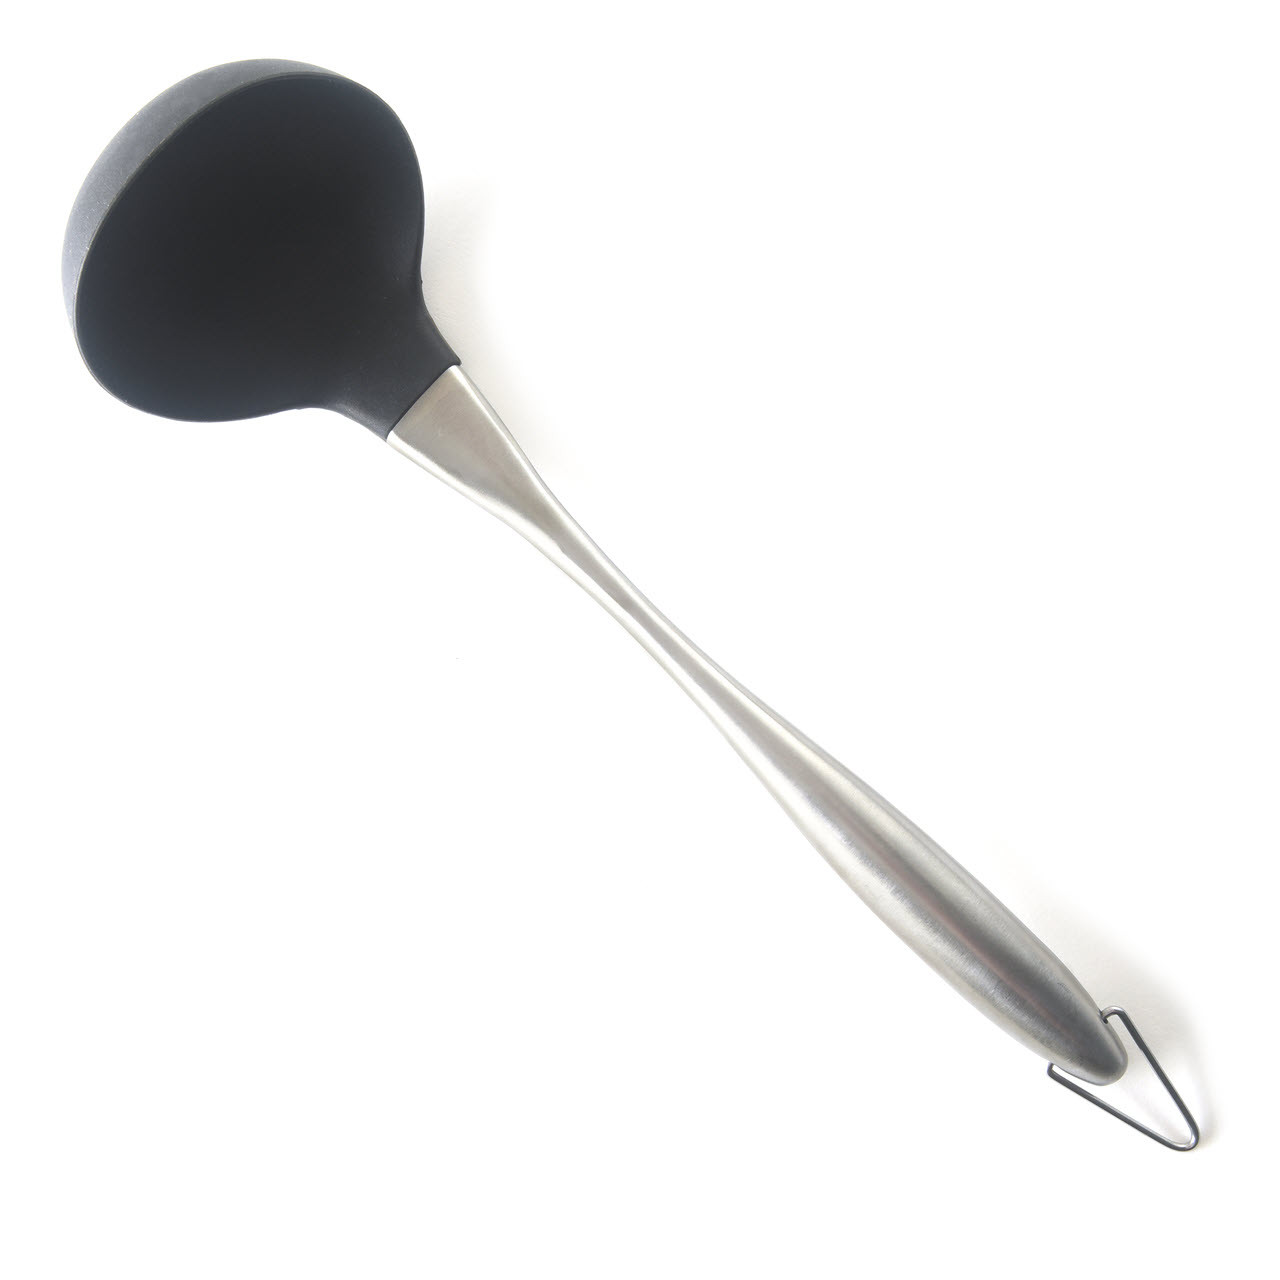 Norpro Grip-EZ Ladle - Silicone and Stainless Steel